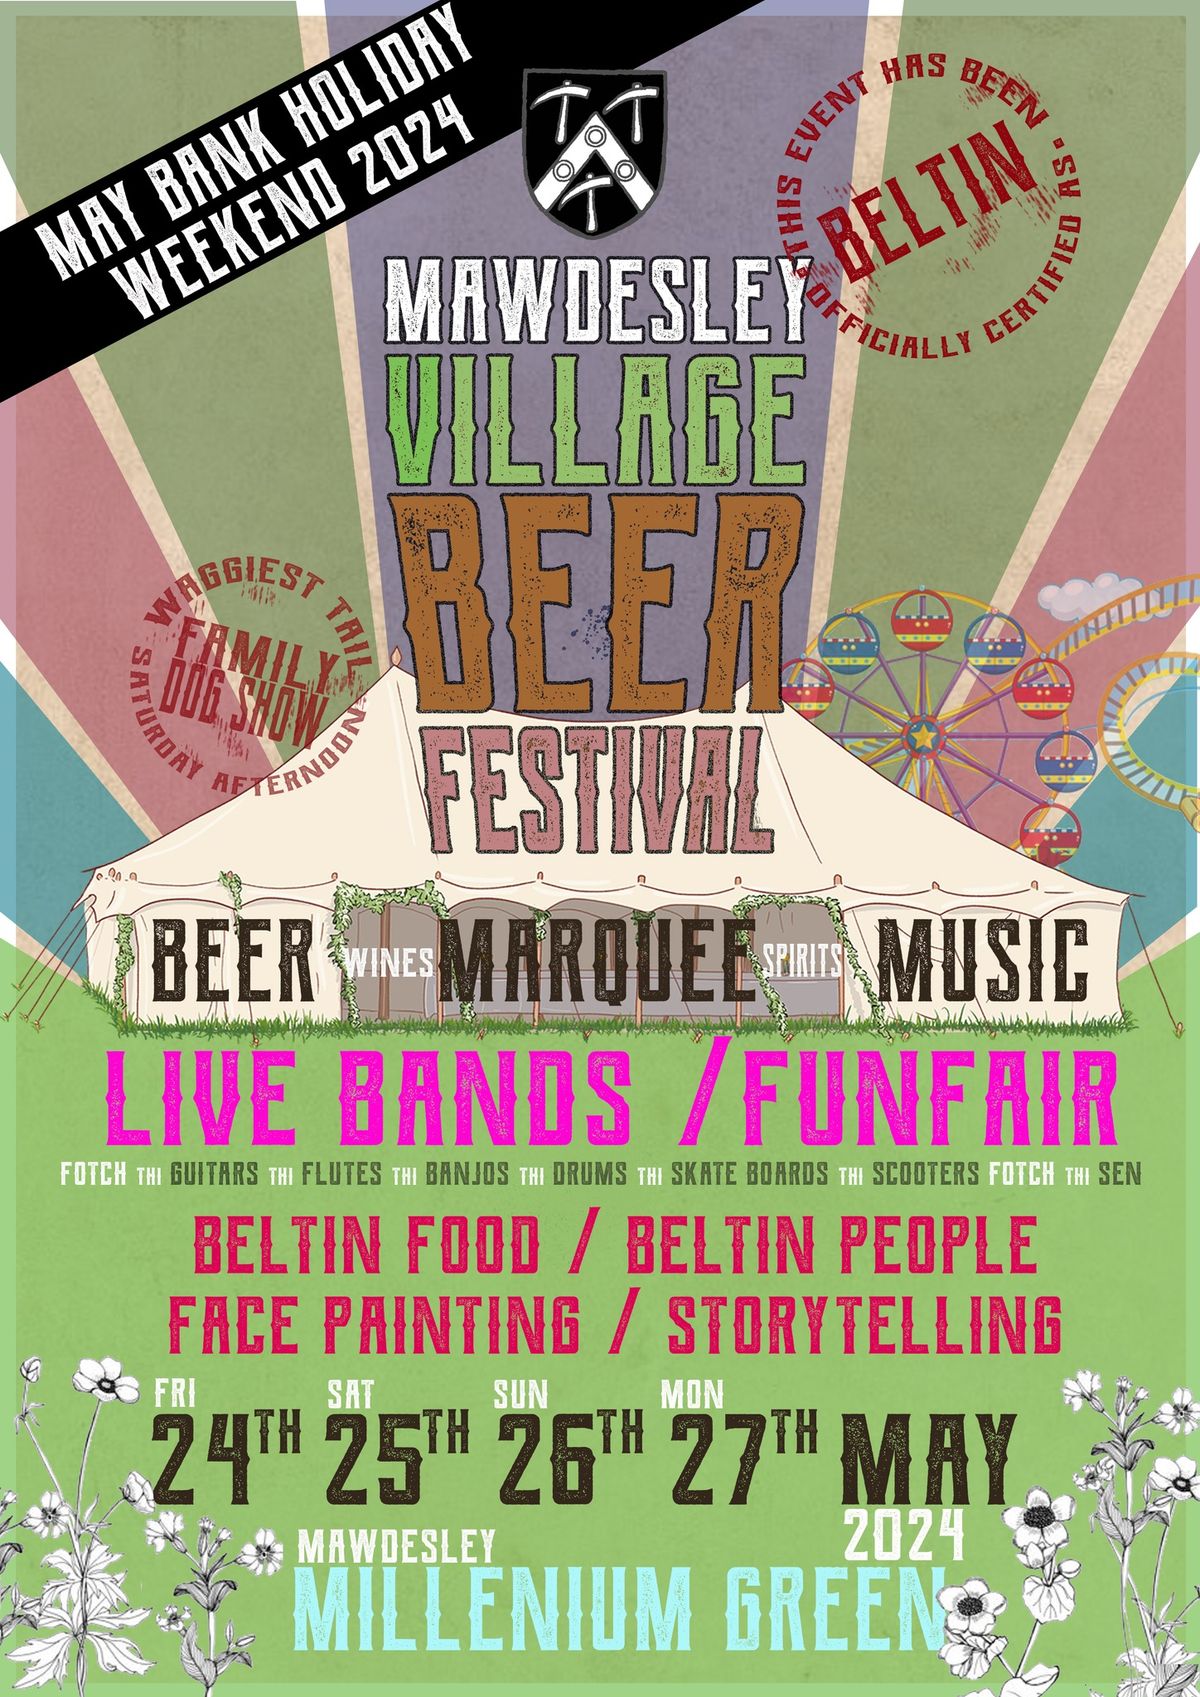 MAWDESLEY VILLAGE MUSIC AND BEER FESTIVAL